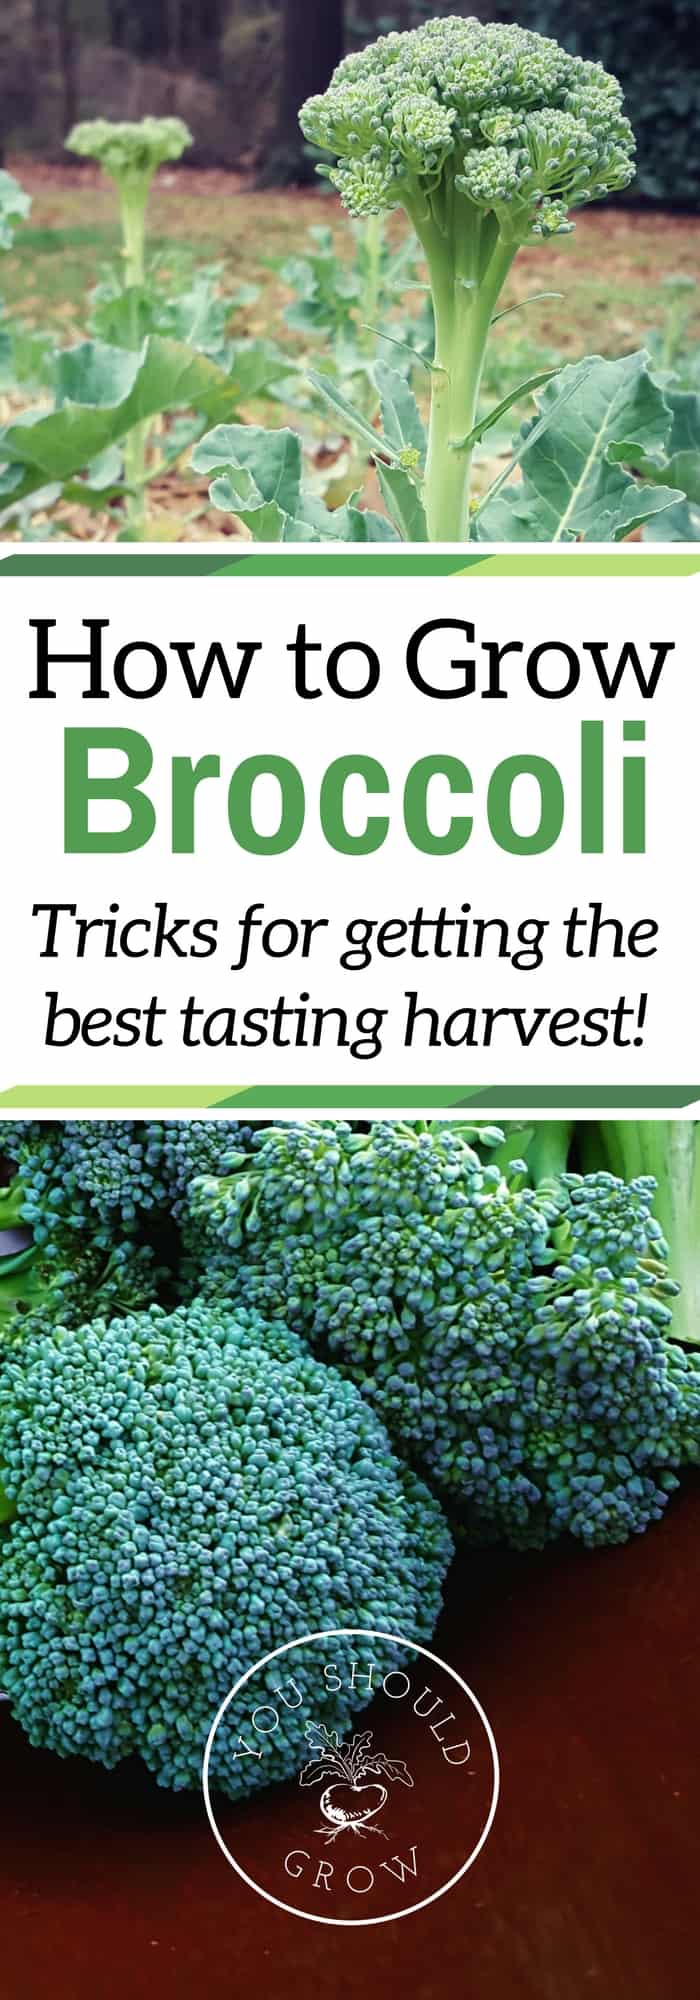 Image of homegrown broccoli with text overlay: How to grow broccoloi trics for getting the best tasting harvest